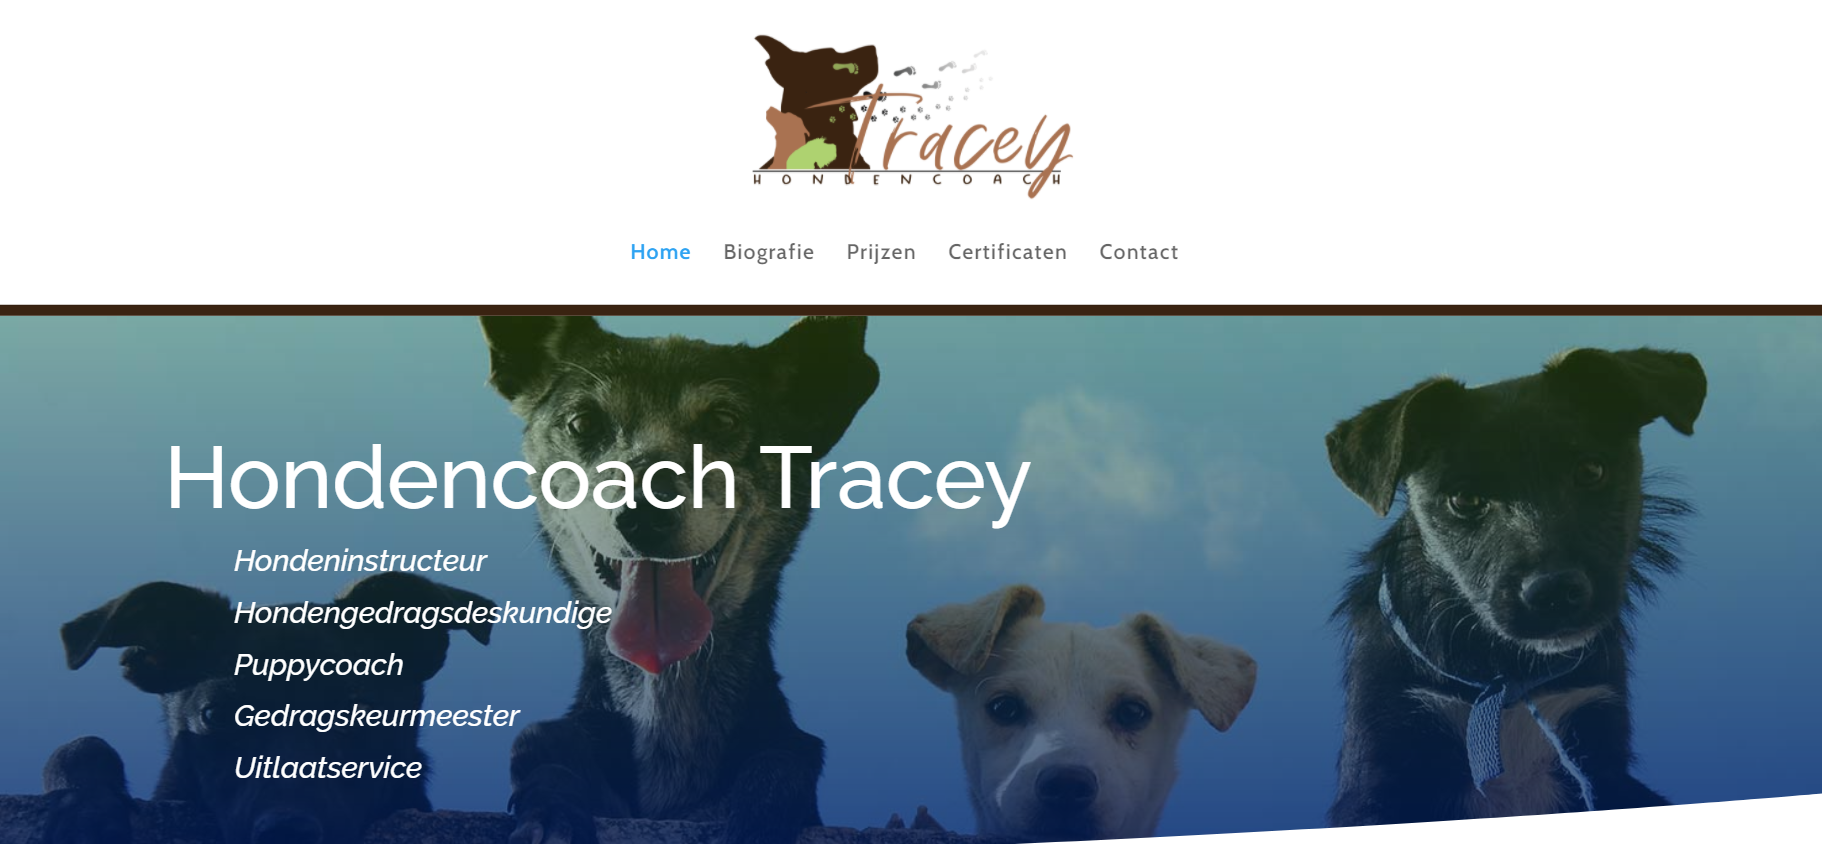 hondencoach-tracey.be